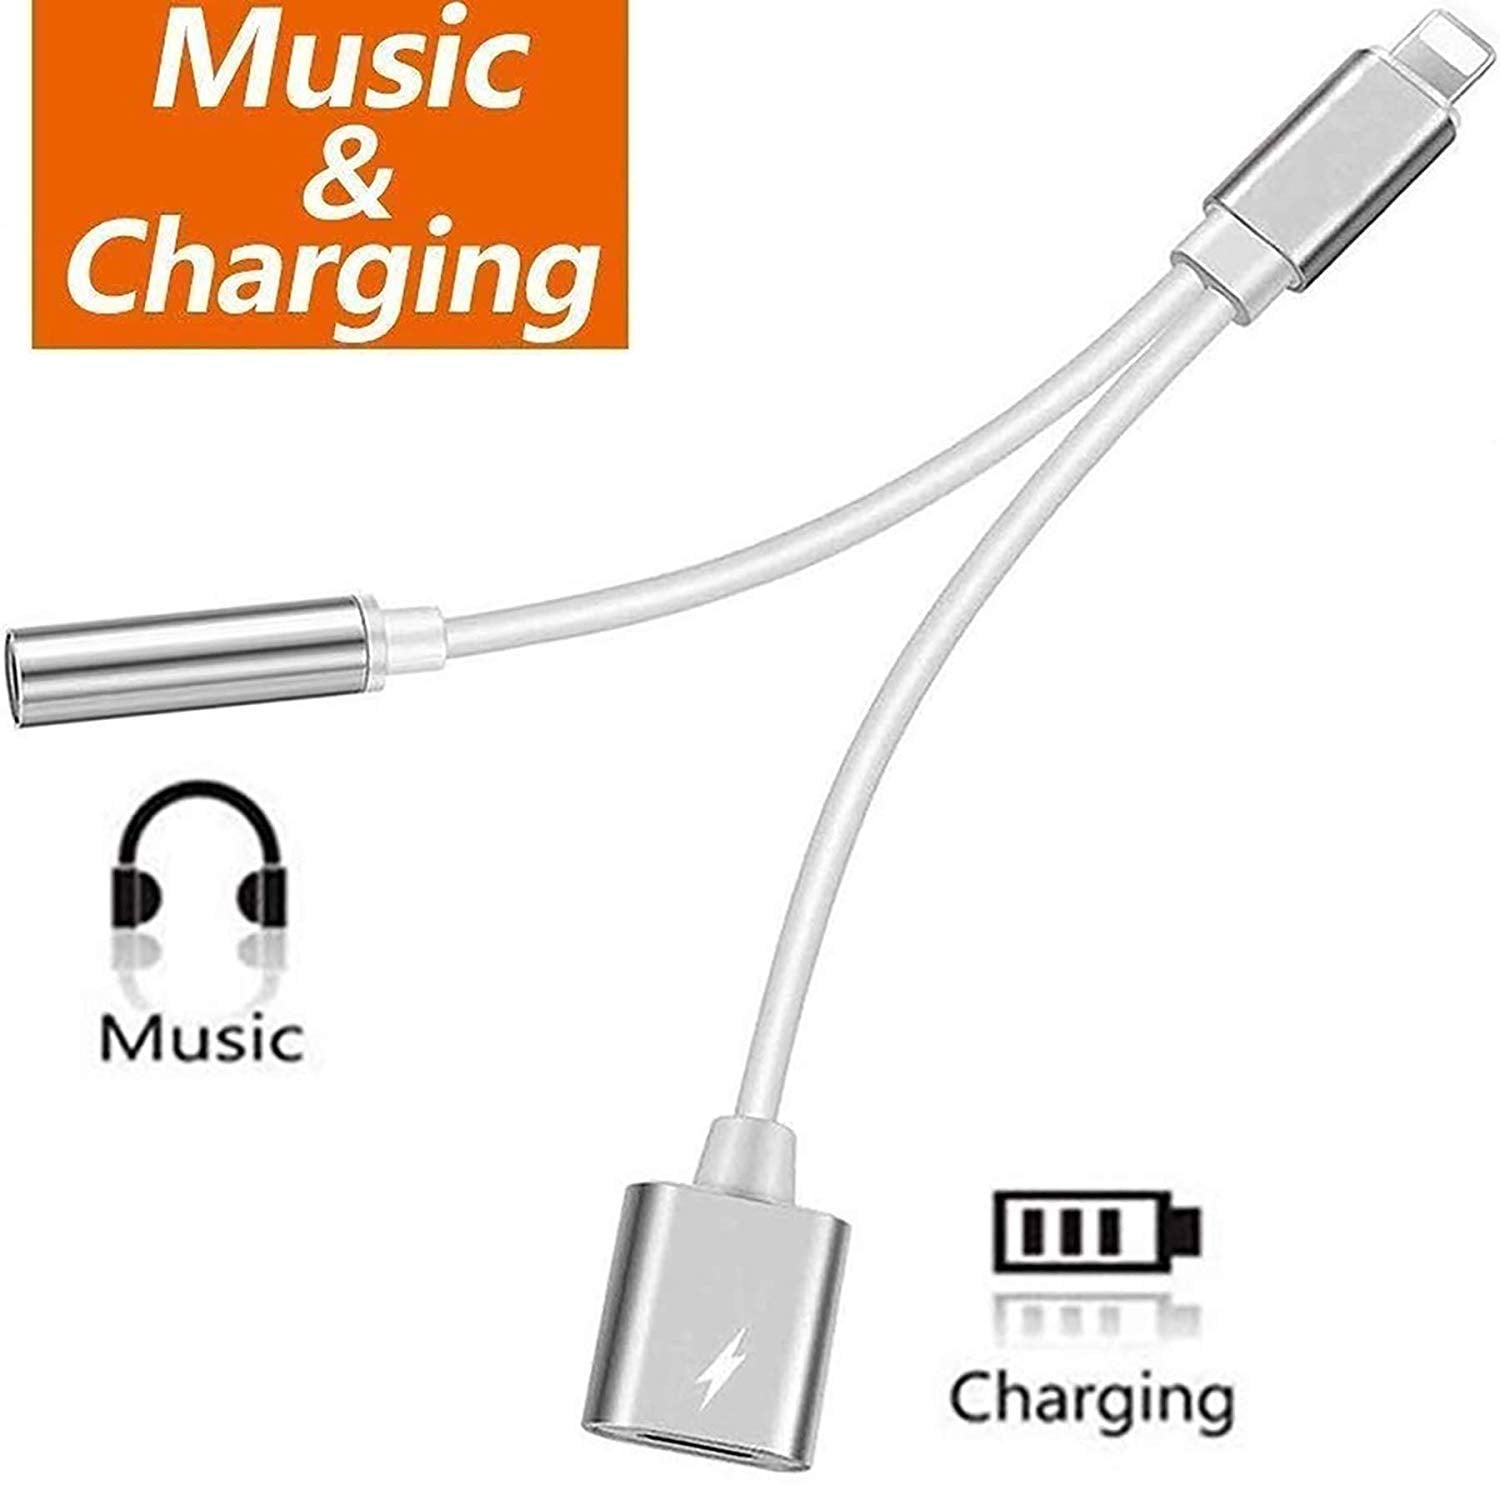 Lightning to 3.5 mm Headphone Jack Adapter Compatible with iPhone